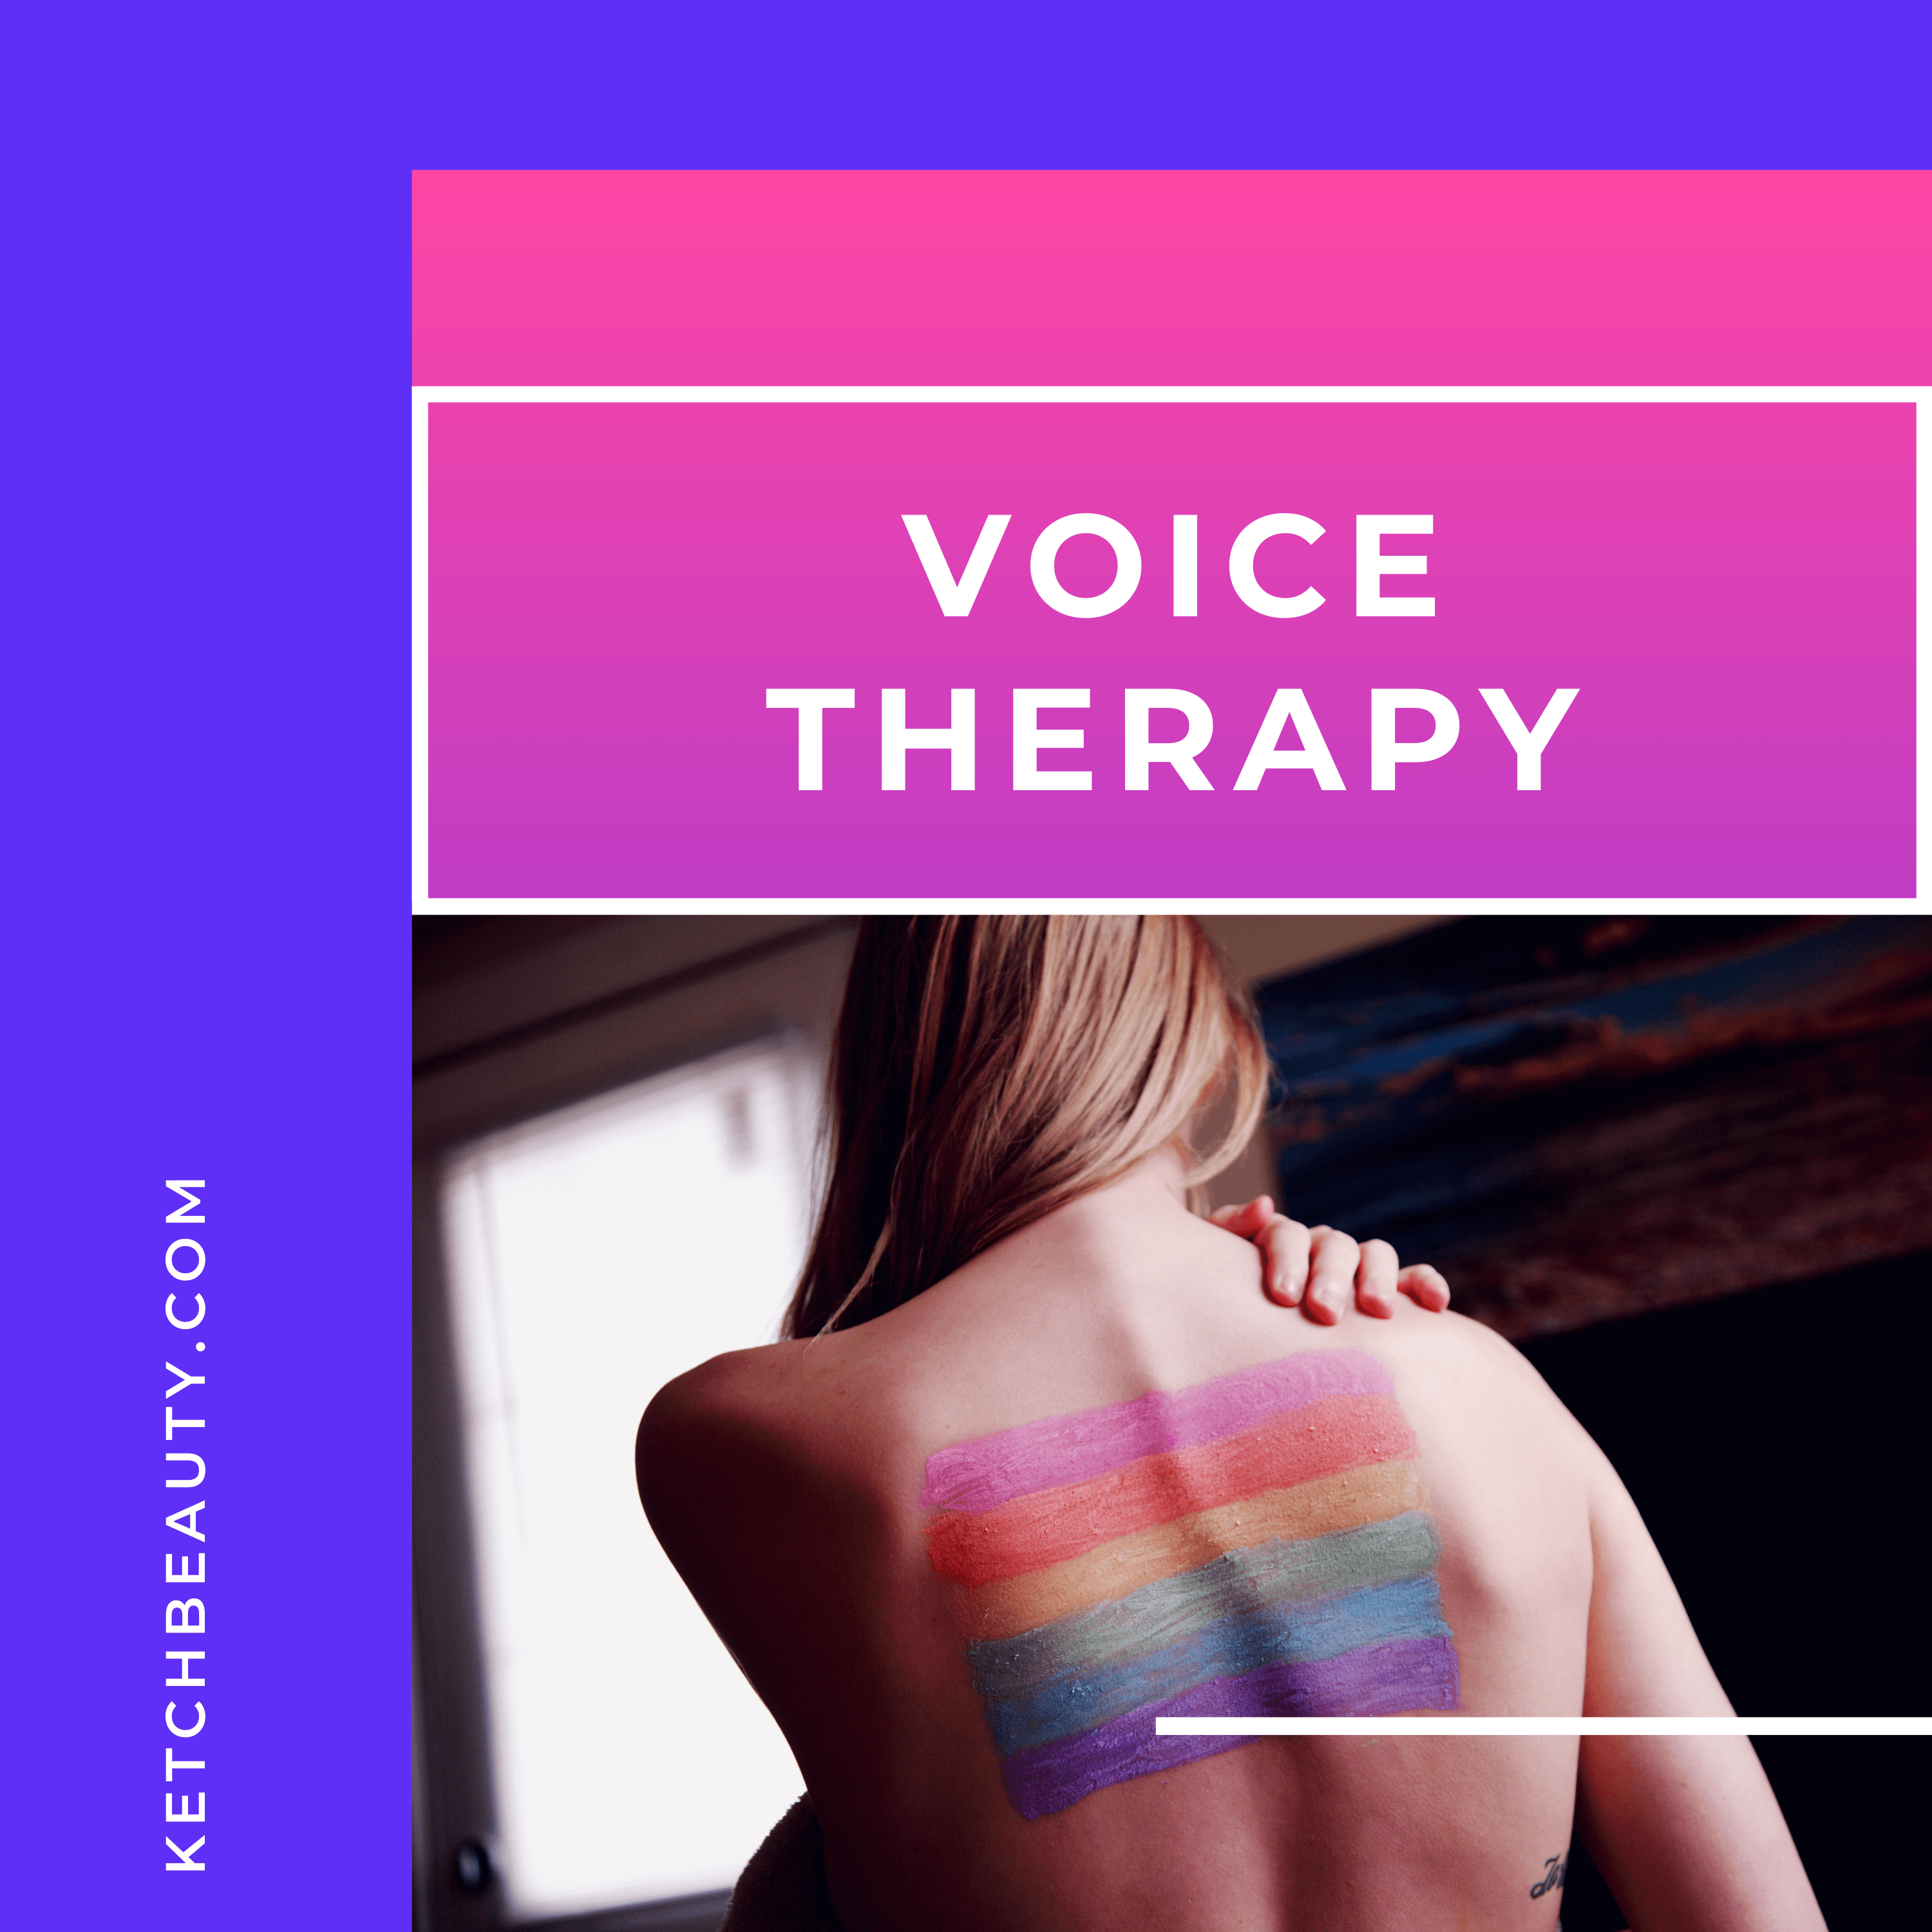 TRANSGNEDER VOICE THERAPY